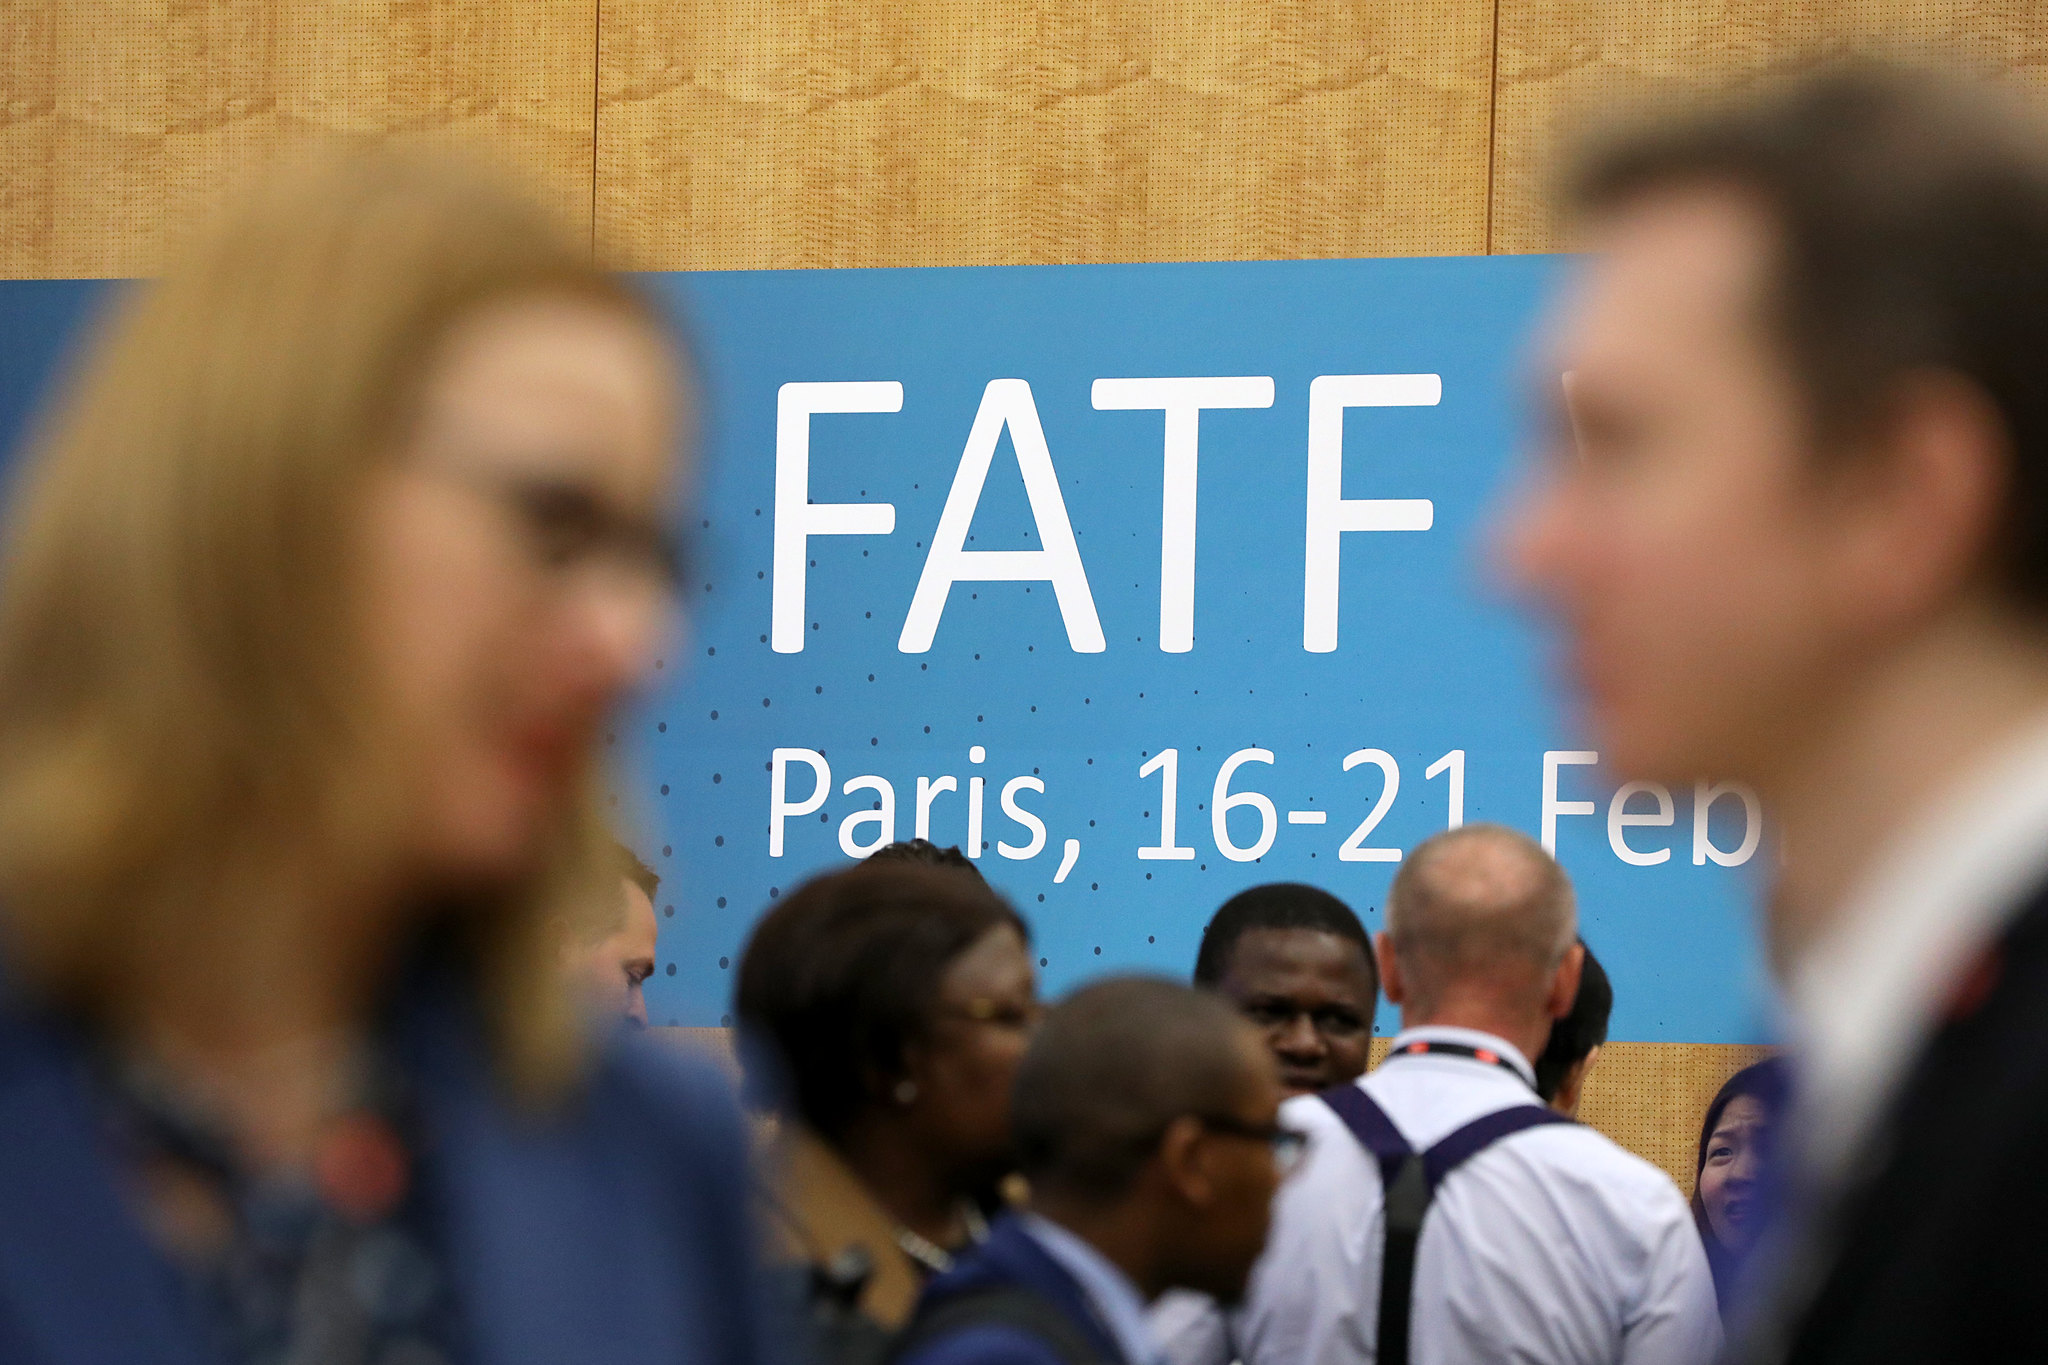 Fatf-plans-to-strengthen-global-supervisory-framework-for-crypto-exchanges